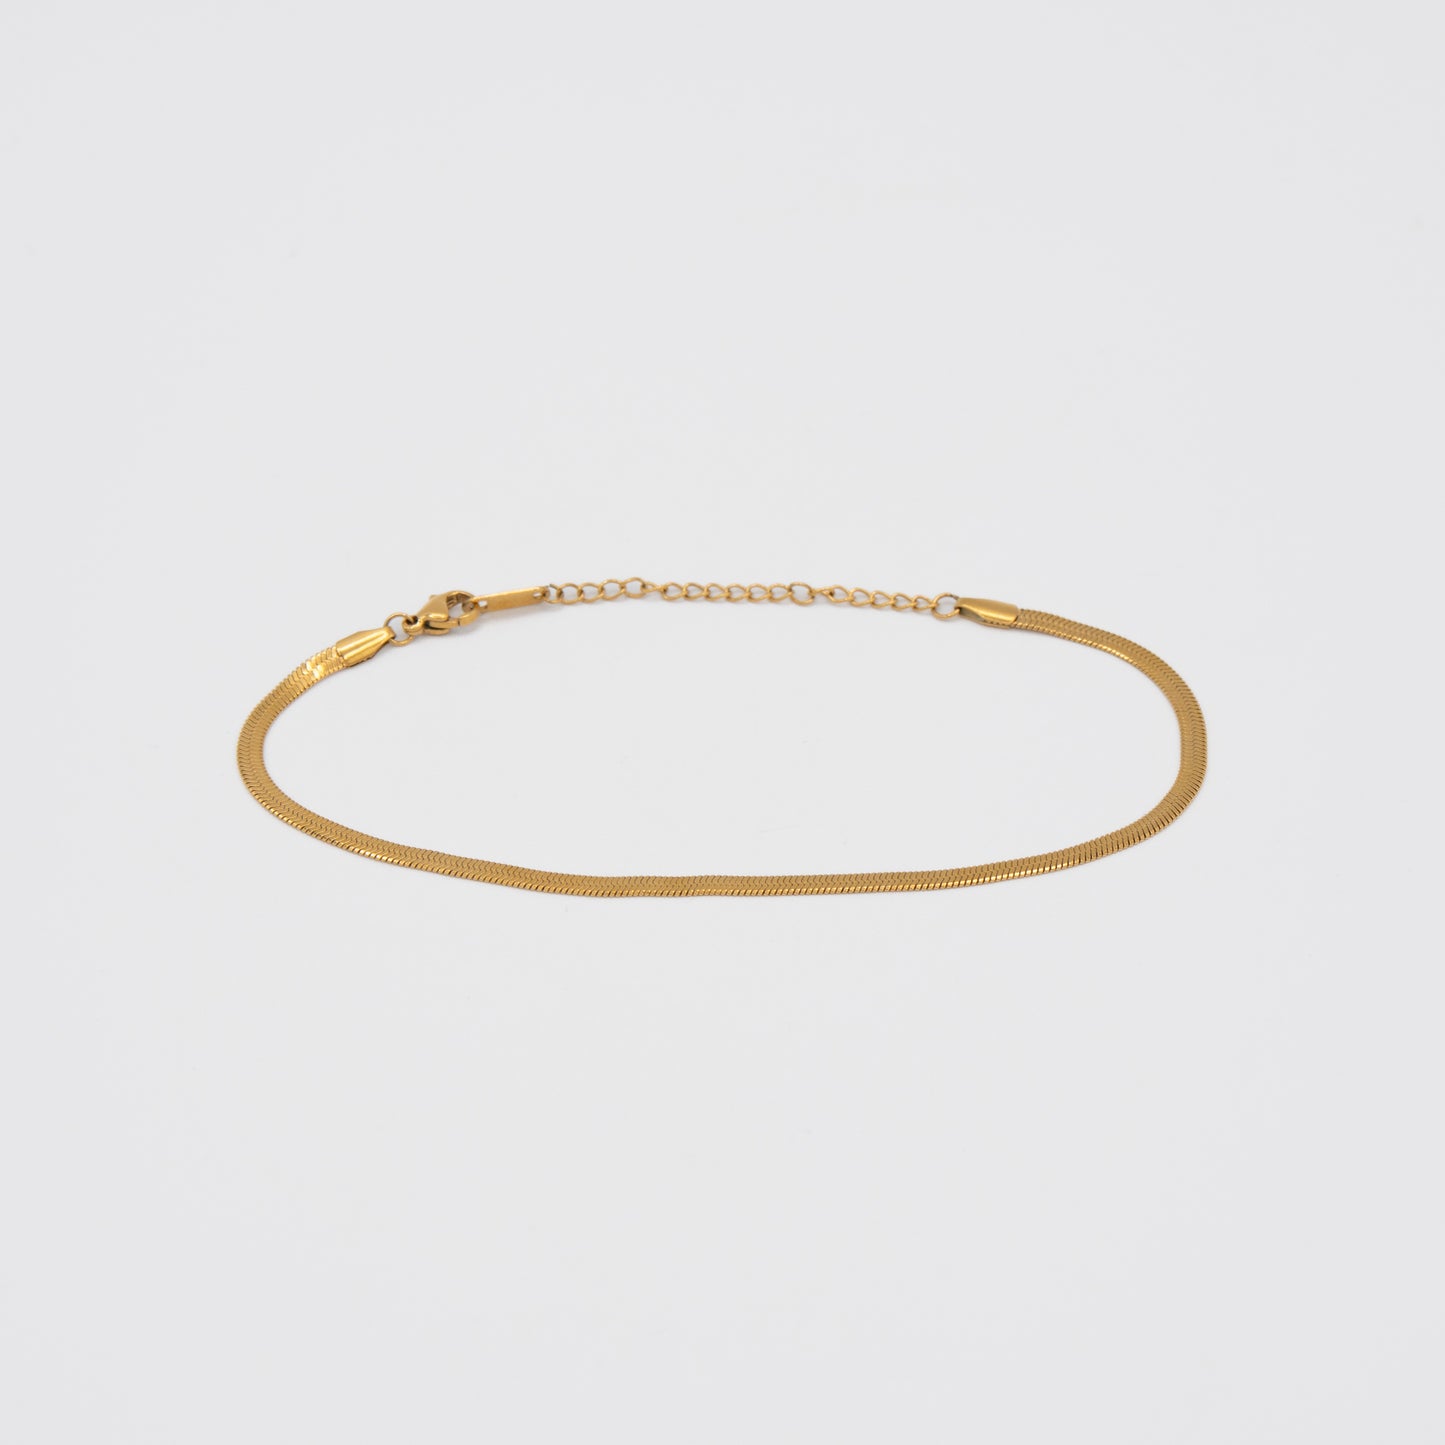 Shapes Studio - Gold Chain Anklet